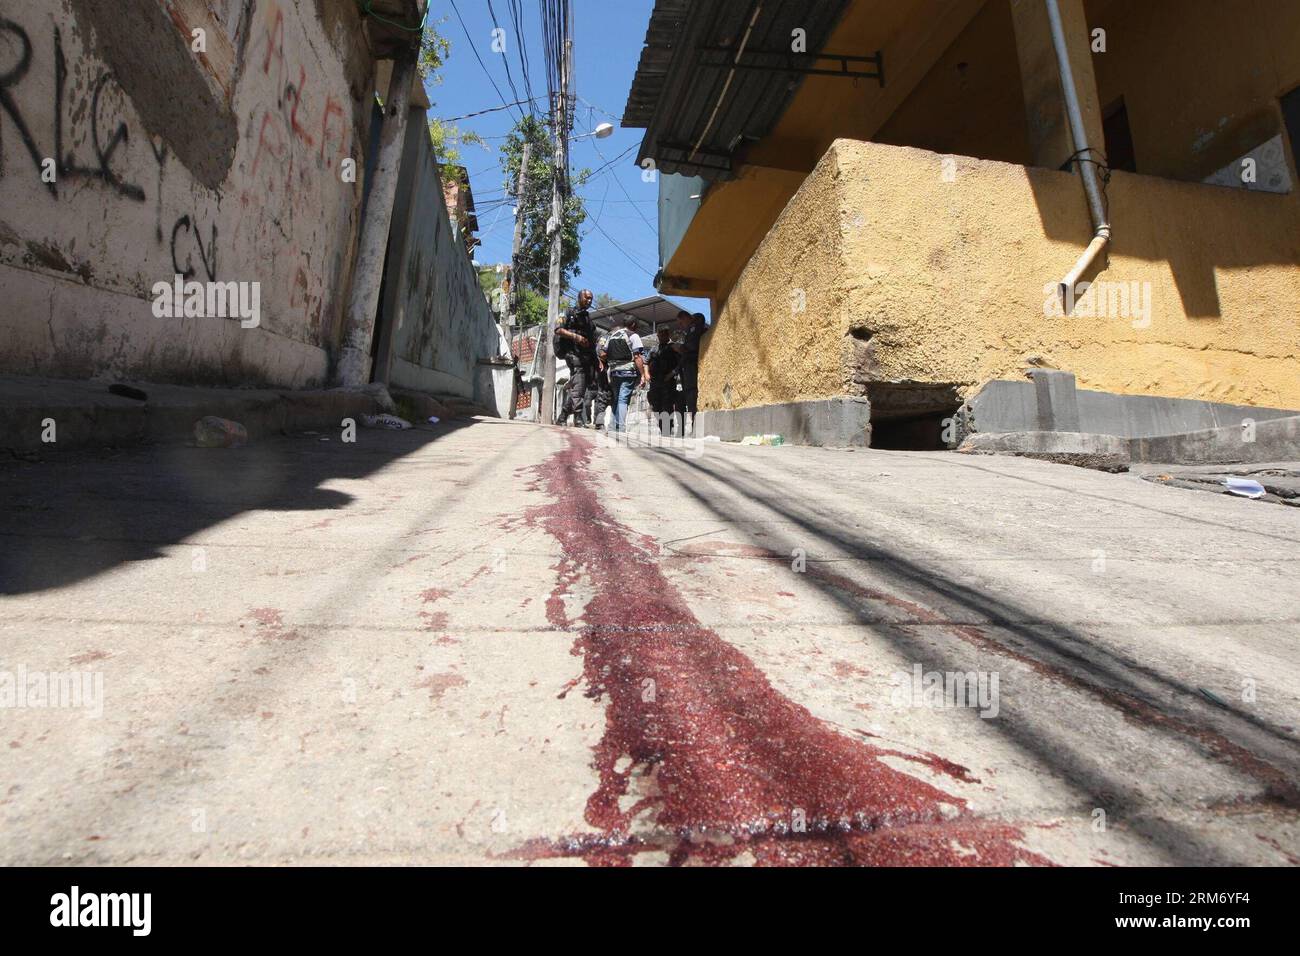 RIO DE JANEIRO, Feb. 4, 2014 - Police elements walk near the blood stain during a police operation, north of Rio de Janeiro, Brazil, on Feb. 4, 2014. According to the local press, the objective of this operation in which at least 10 persons died, was to arrest the traffickers of the command that participated in an attack on Sunday on the Peacemaker Police Unit. (Xinhua/Severino Silva/Agencia O Dia/Agencia Estado) BRAZIL OUT ATTENTION EDITORS EXPLICIT GRAPHIC CONTENT BRAZIL-RIO DE JANEIRO-SECURITY-OPERATION PUBLICATIONxNOTxINxCHN   Rio de Janeiro Feb 4 2014 Police Element Walk Near The Blood St Stock Photo